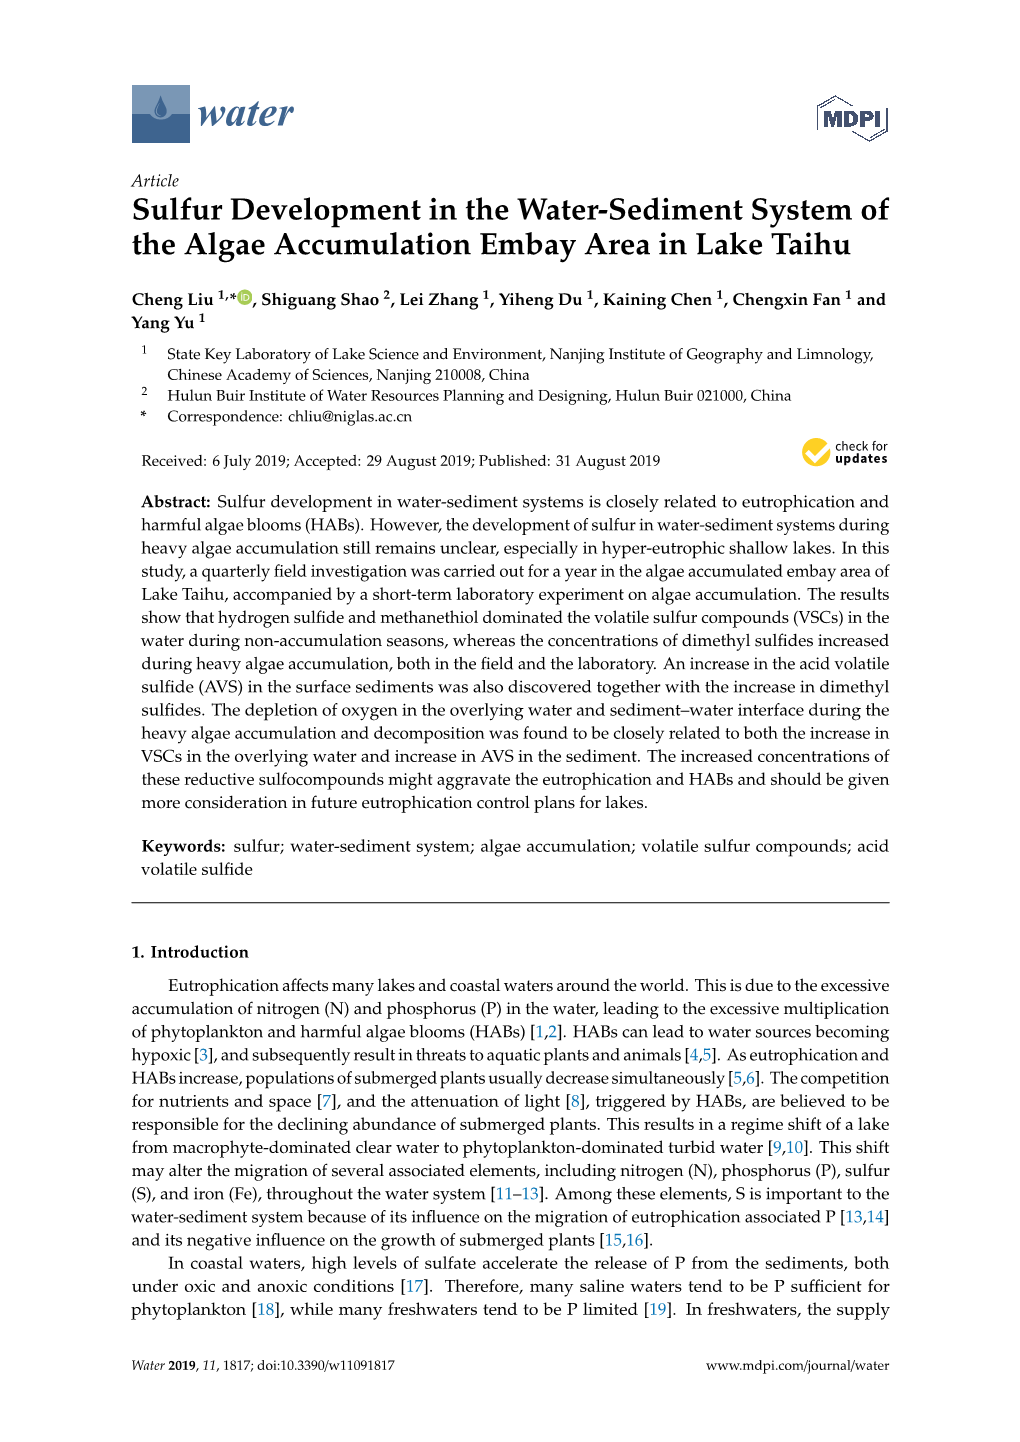 Sulfur Development in the Water-Sediment System of the Algae Accumulation Embay Area in Lake Taihu